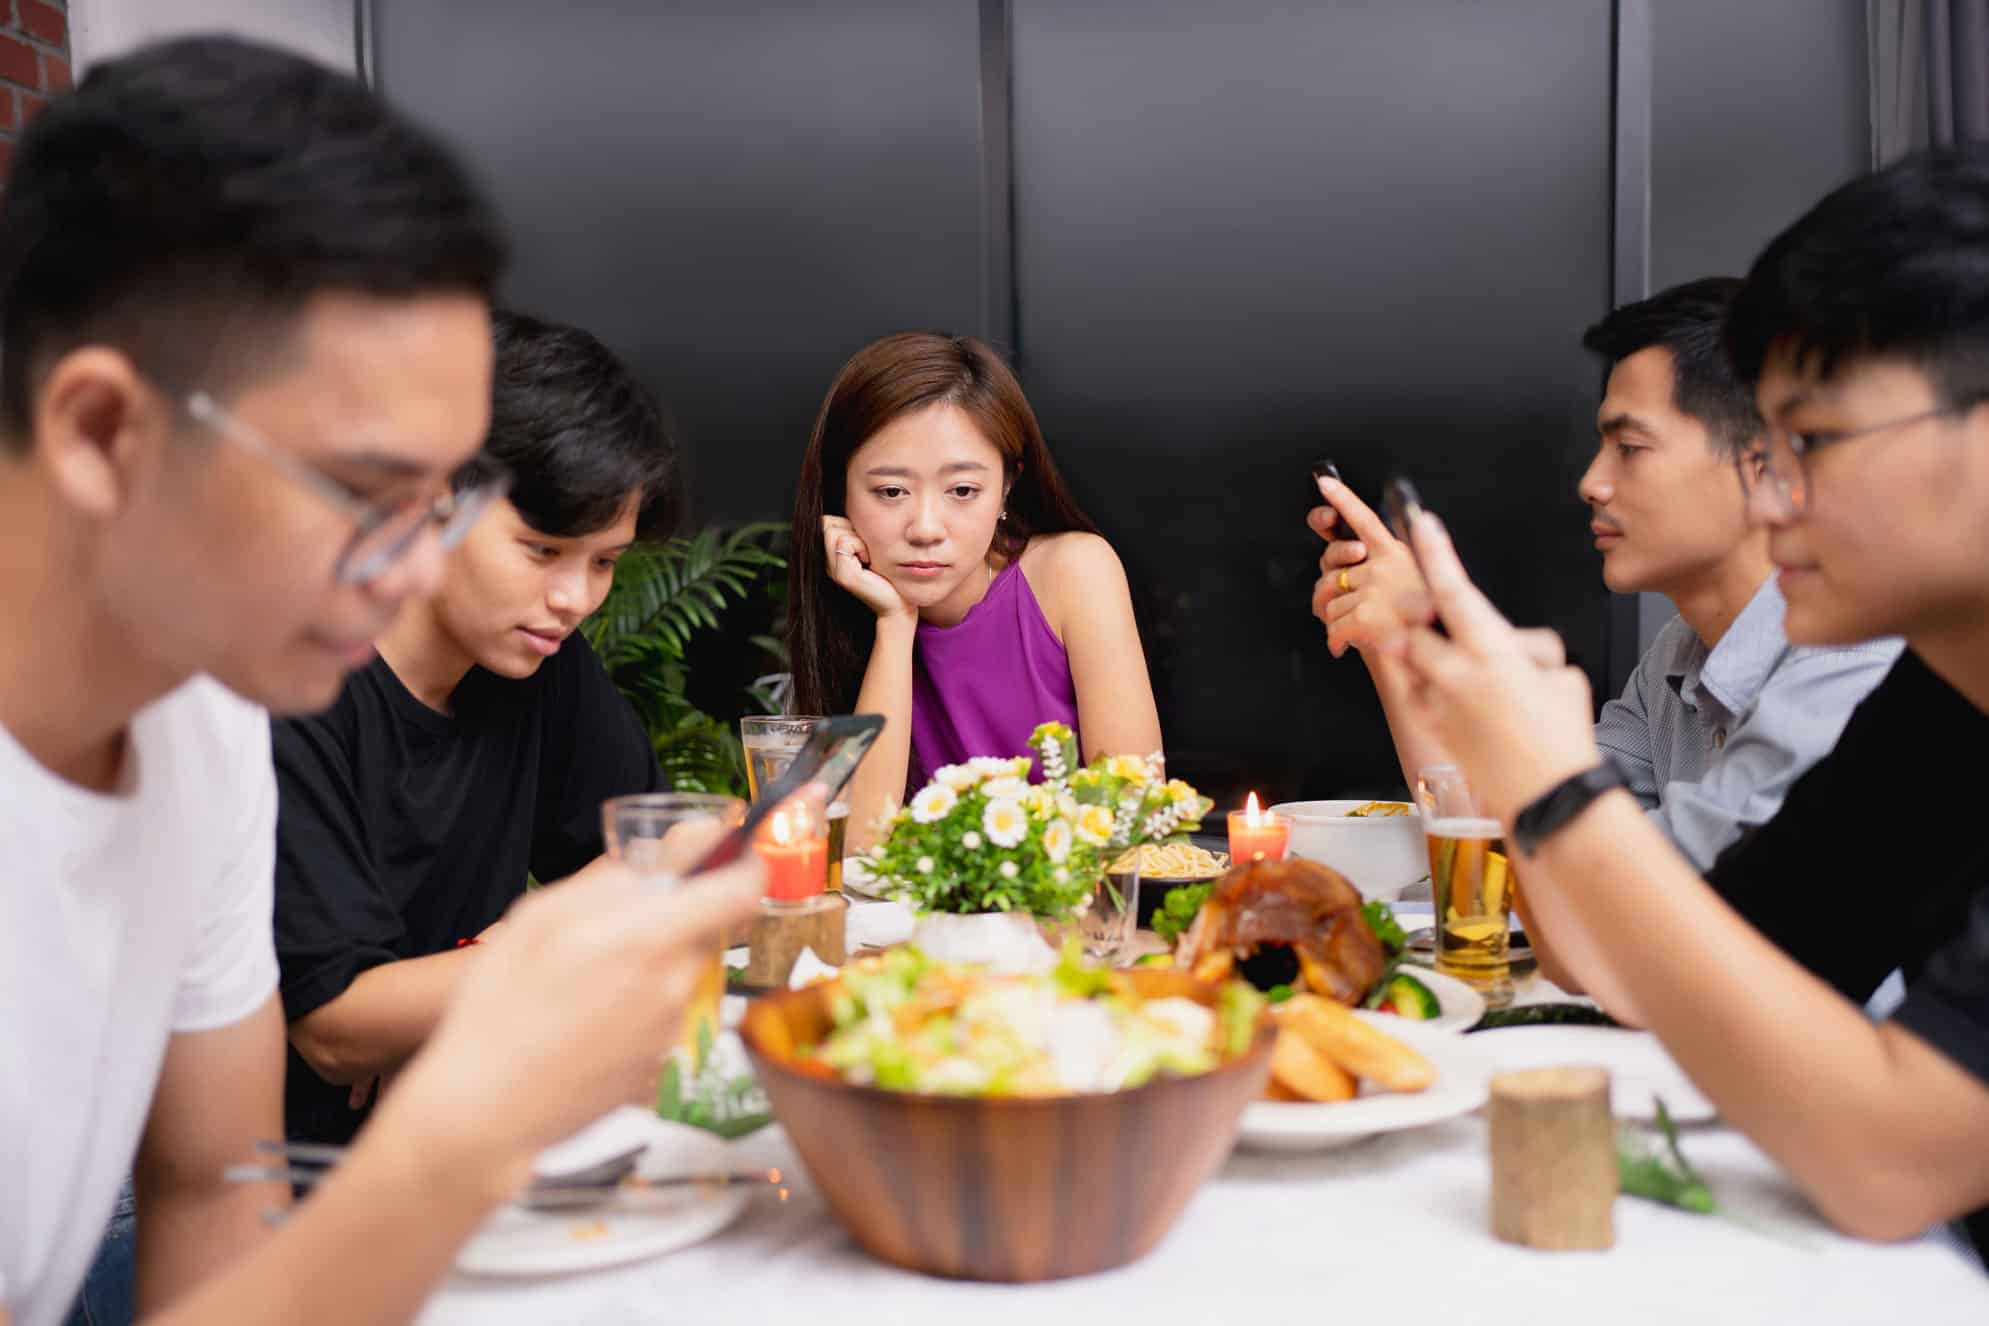 Family on a dinner table filled with food, one woman looks sad, everyone else are on their phones